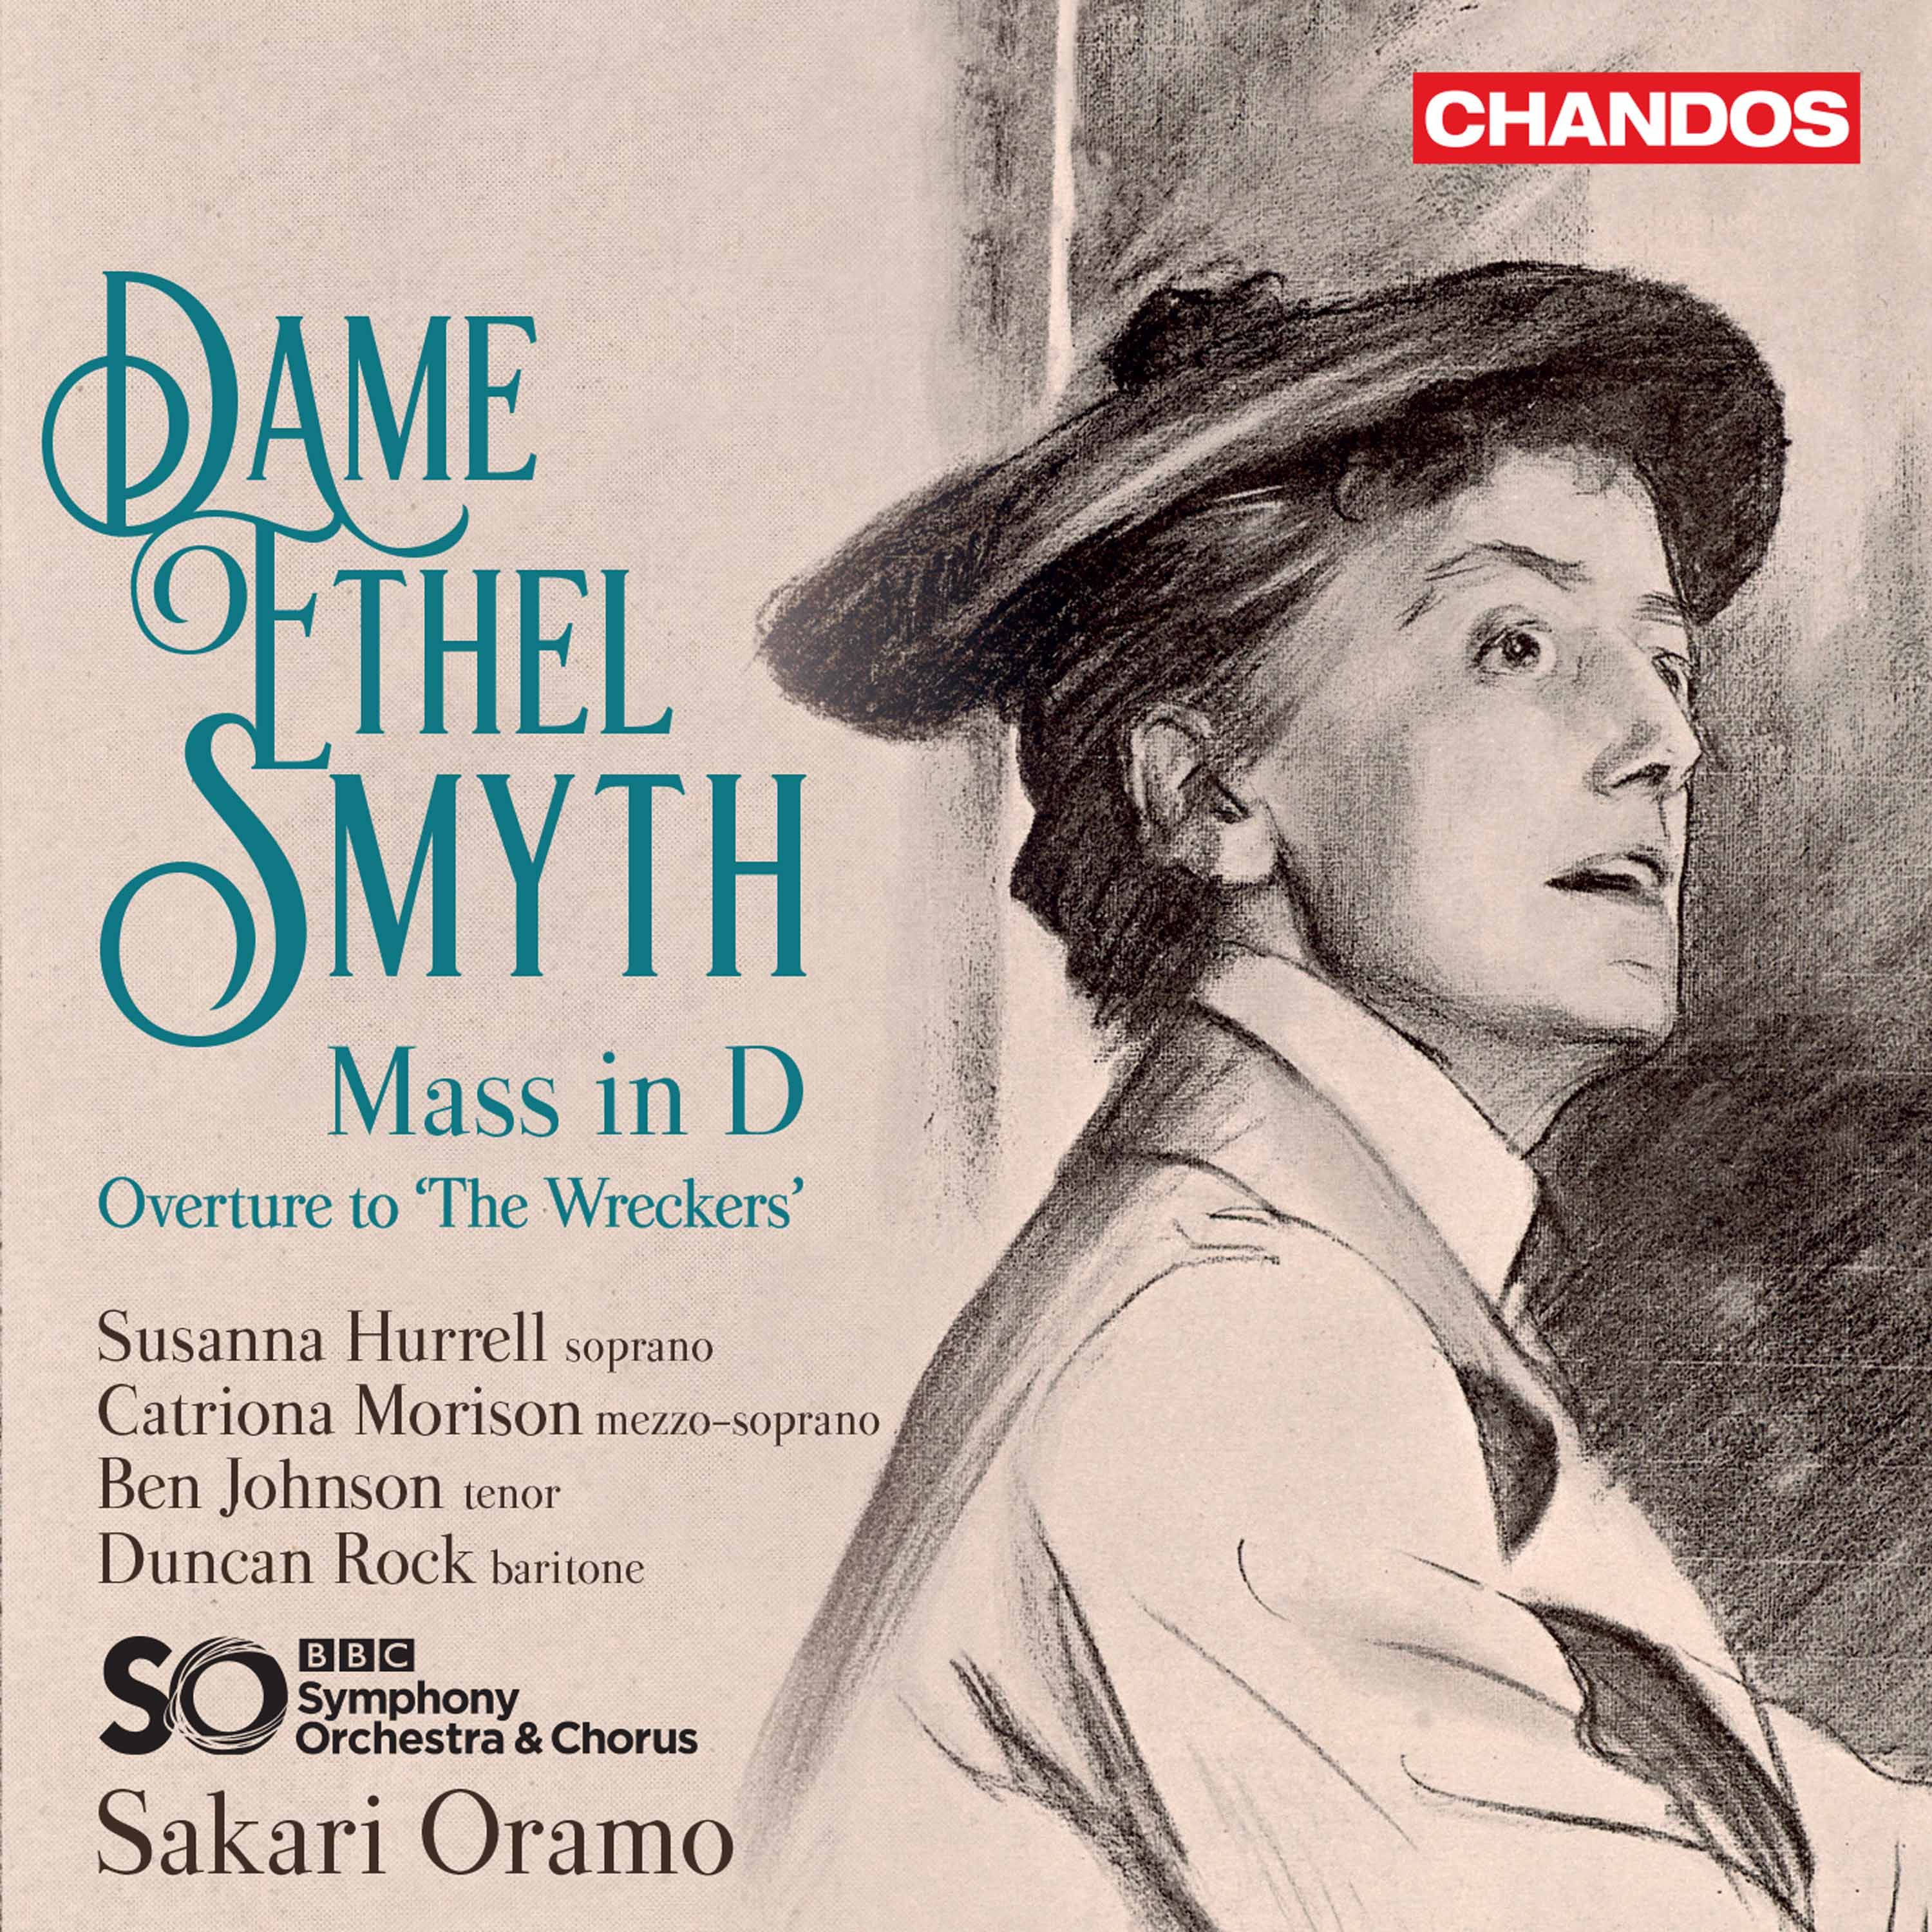 The BBC Symphony Orchestra feat. Sakari Oramo - Smyth: Mass in D Major & Overture to “The Wreckers” (2019) [FLAC 24bit/96kHz]